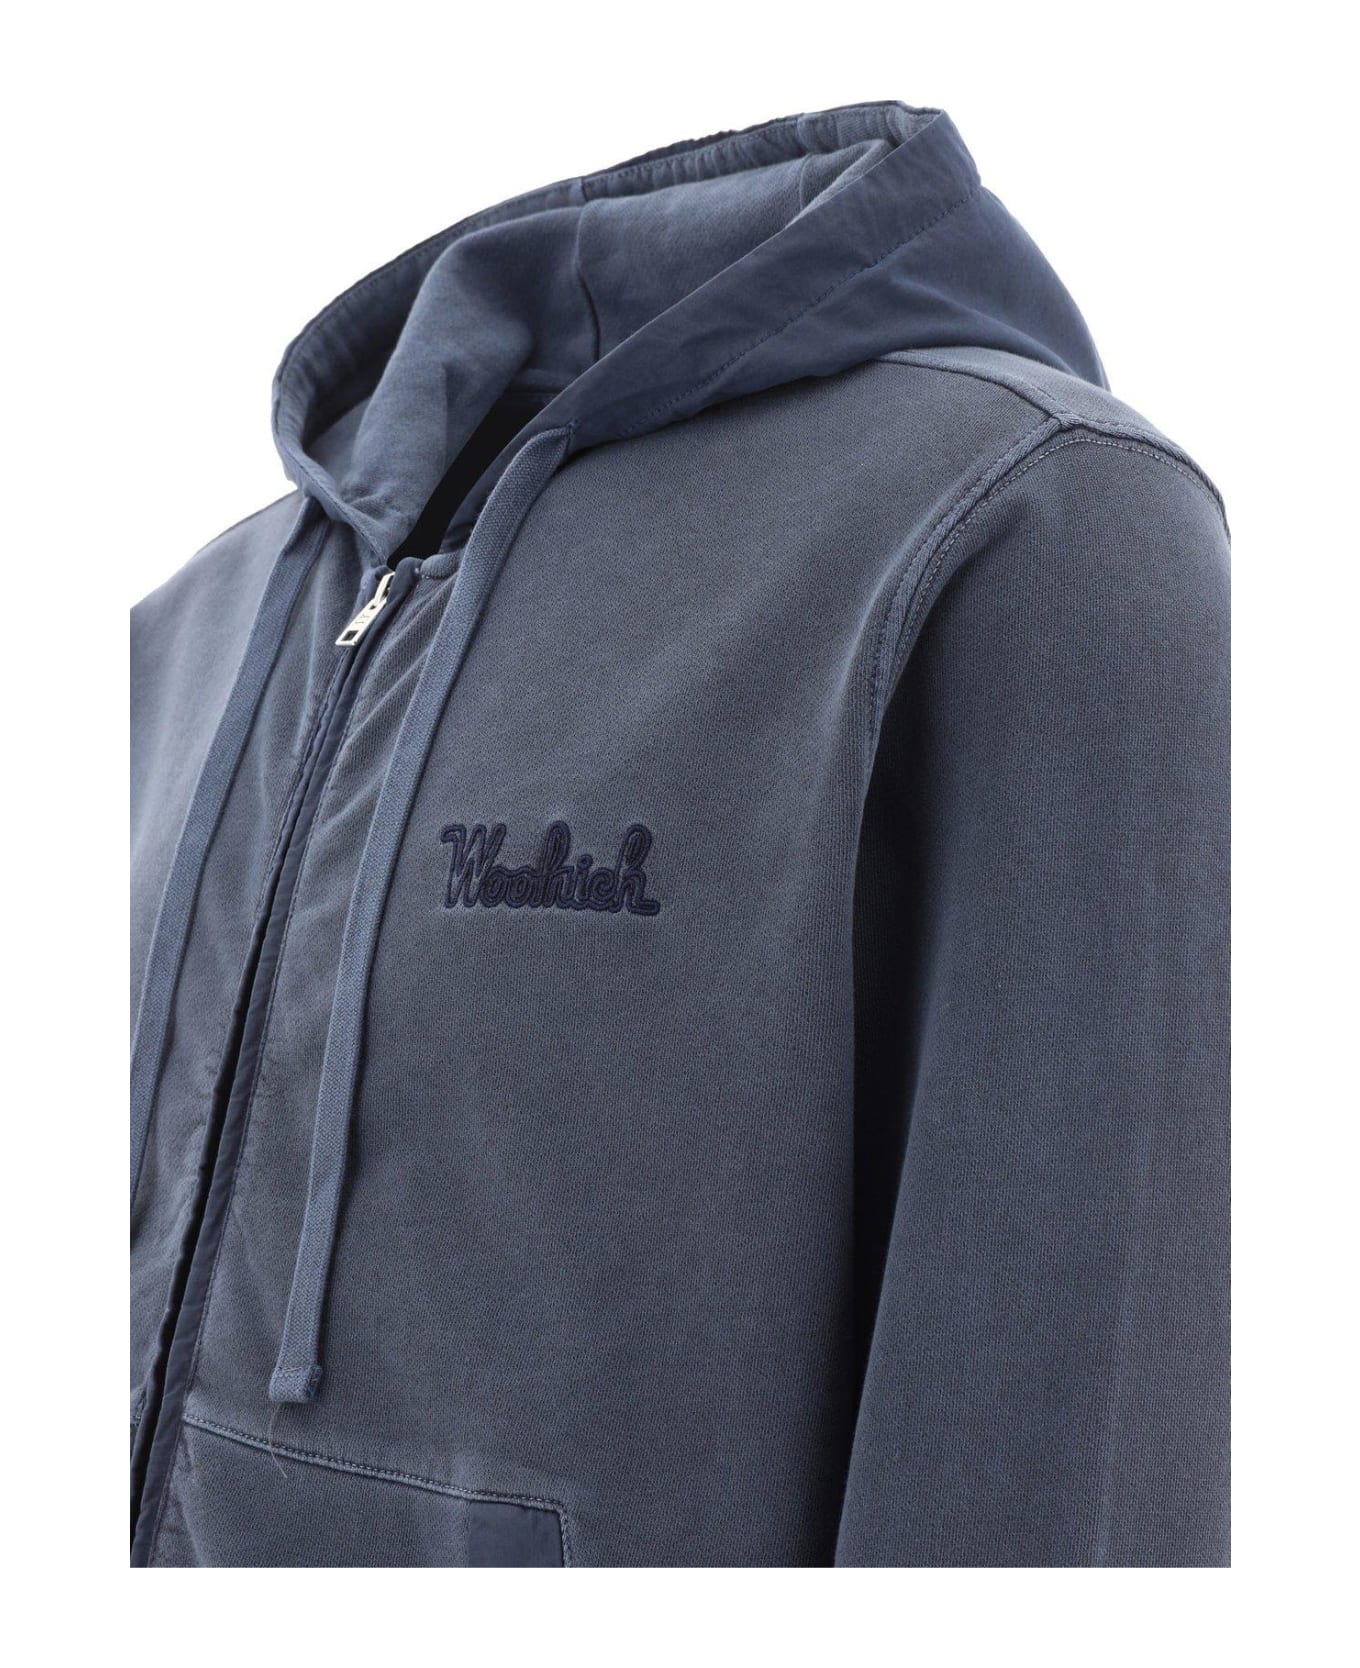 Woolrich Logo Embroidered Zipped Drawstring Hoodie - Melton Blue